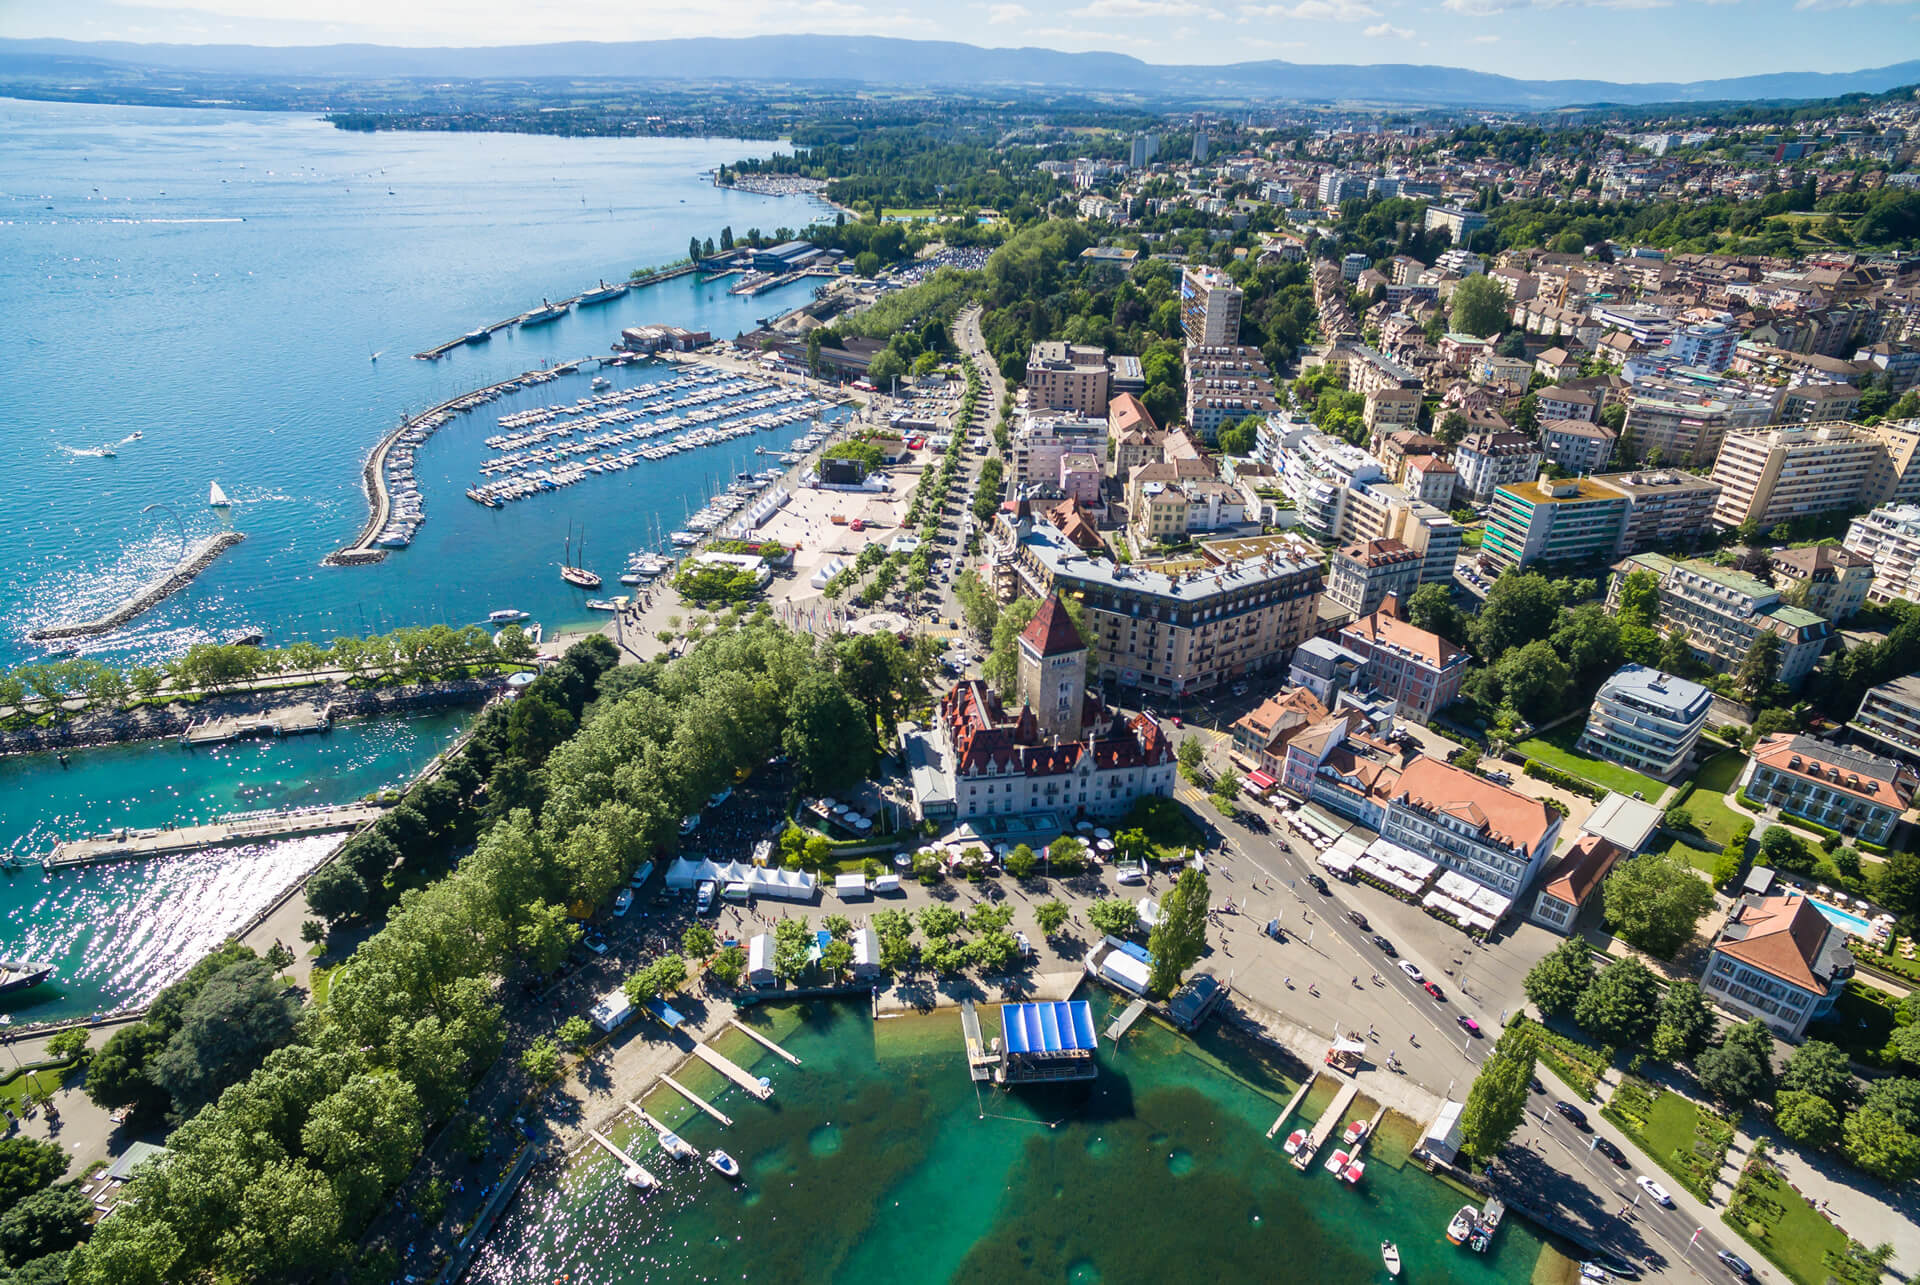 Aerial view of Ouchy waterfront in Lausanne Switzerland